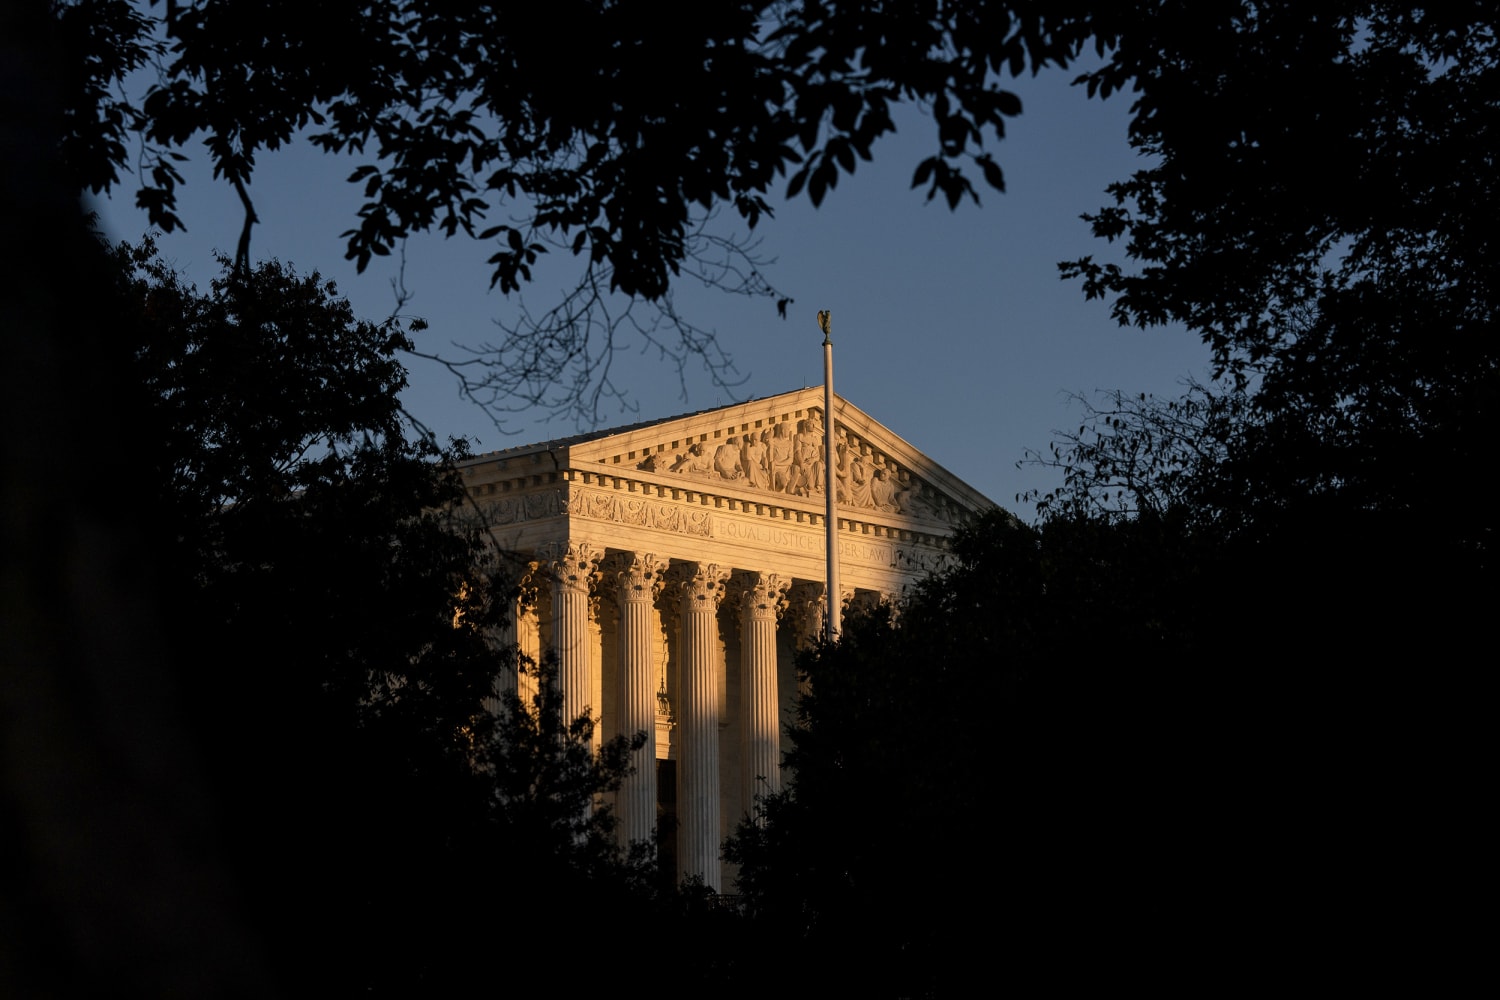 Colleges anxiously await a landmark Supreme Court affirmative action decision